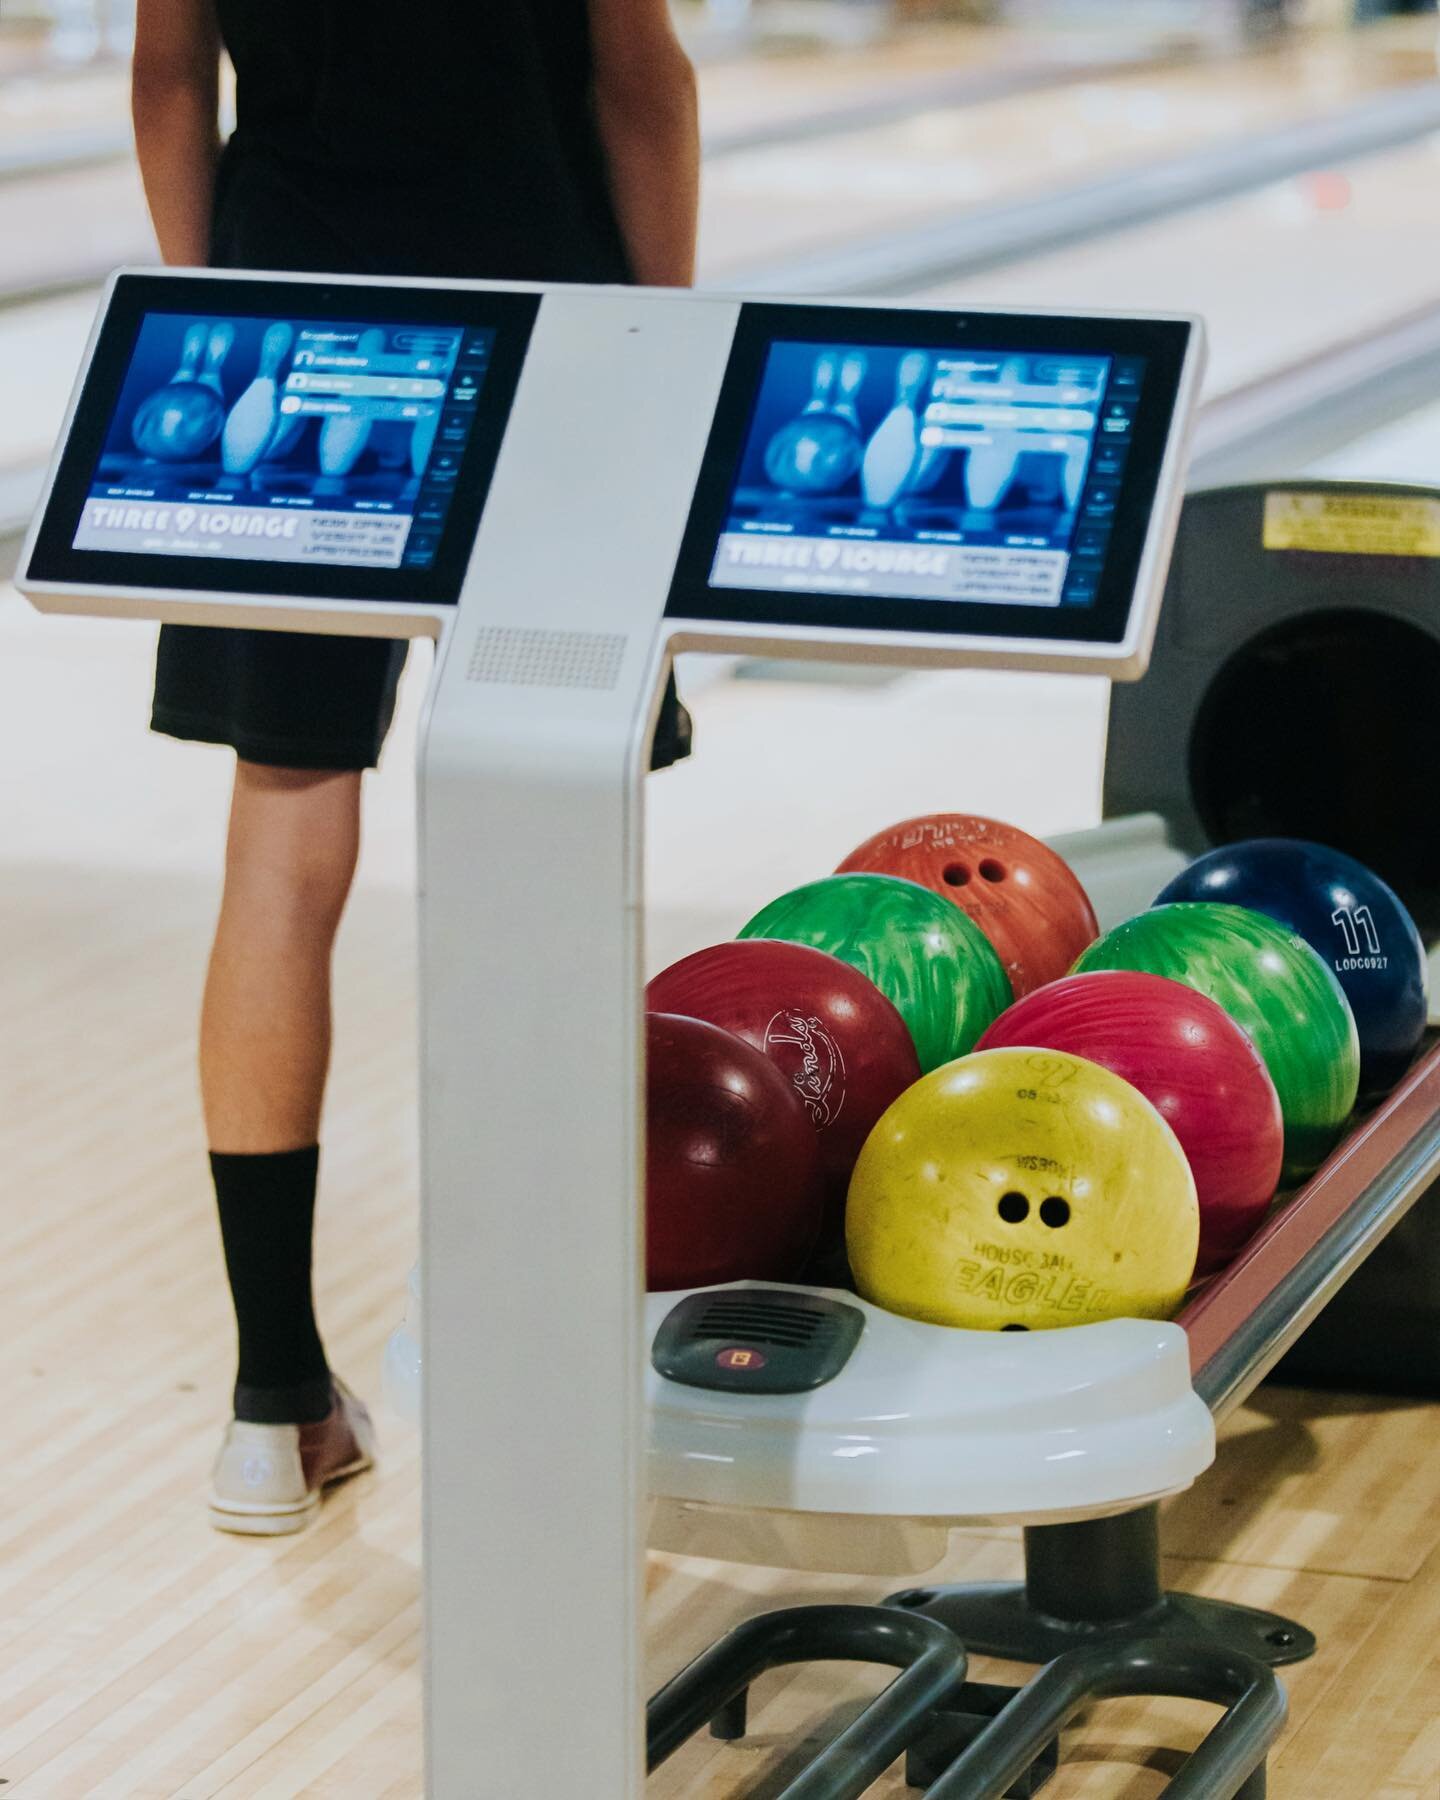 Bowling has been around longer than you think! 💡 British anthropologists found out that the items you need for bowling go as far back as Egyptian tombs around 3200
BC. The first indoor lane was constructed in New York City in 1840 and people saw a g